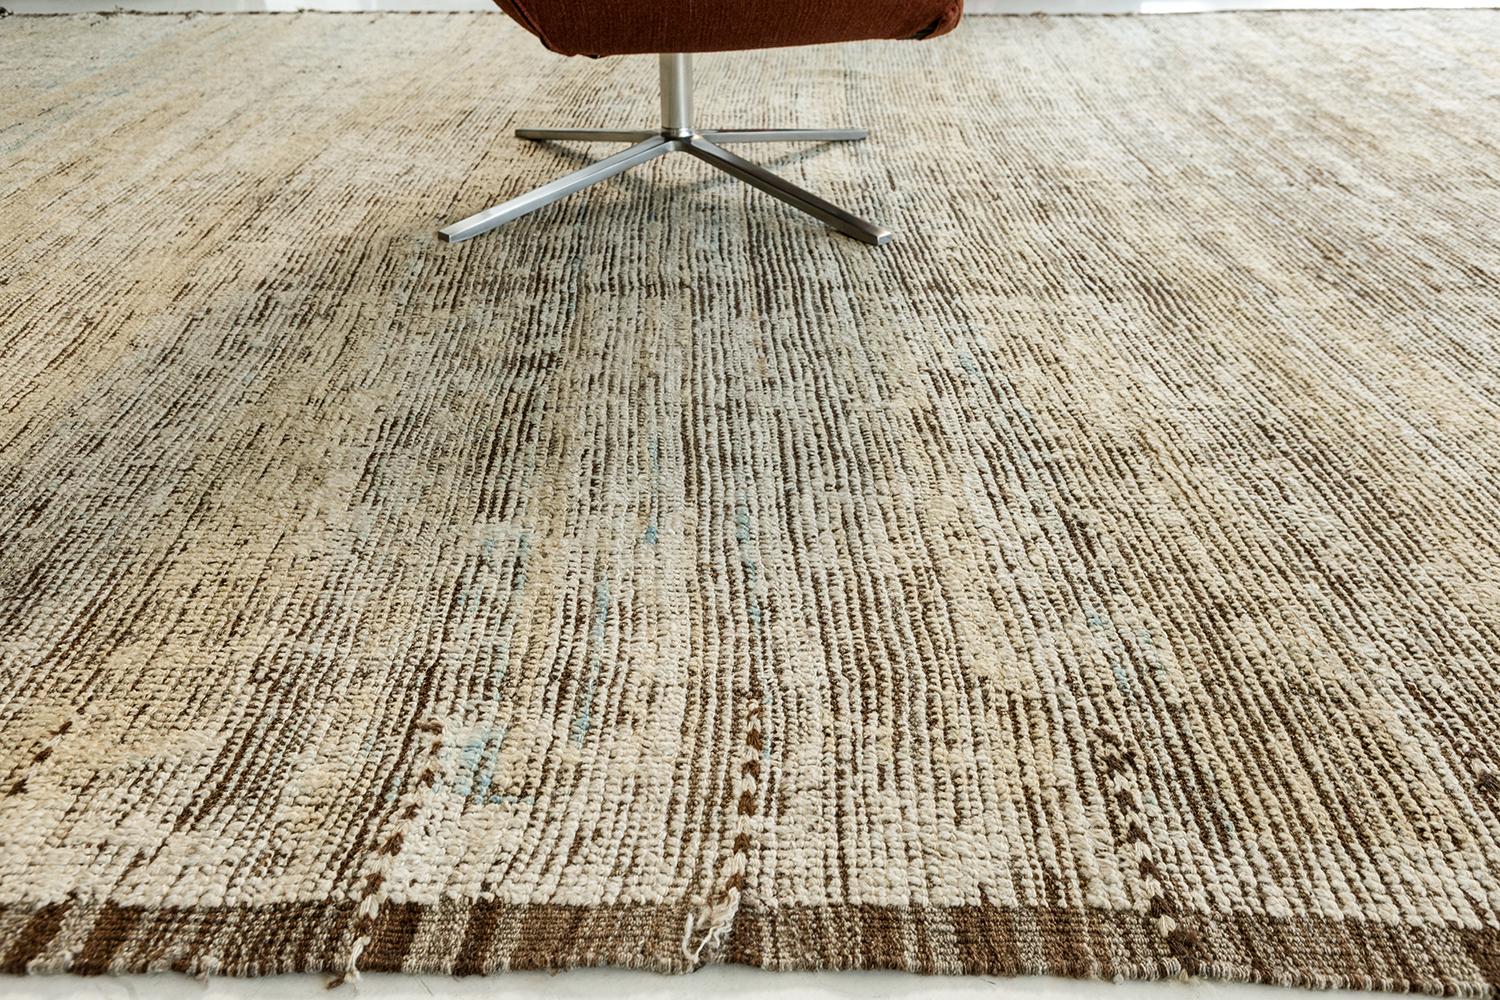 Graceful Earth Tones Modern Distressed Rug, Country of Origin: Afghanistan, Circa Date: Modern. 9 ft 10 in x 13 ft 8 in (3 m x 4.17 m)